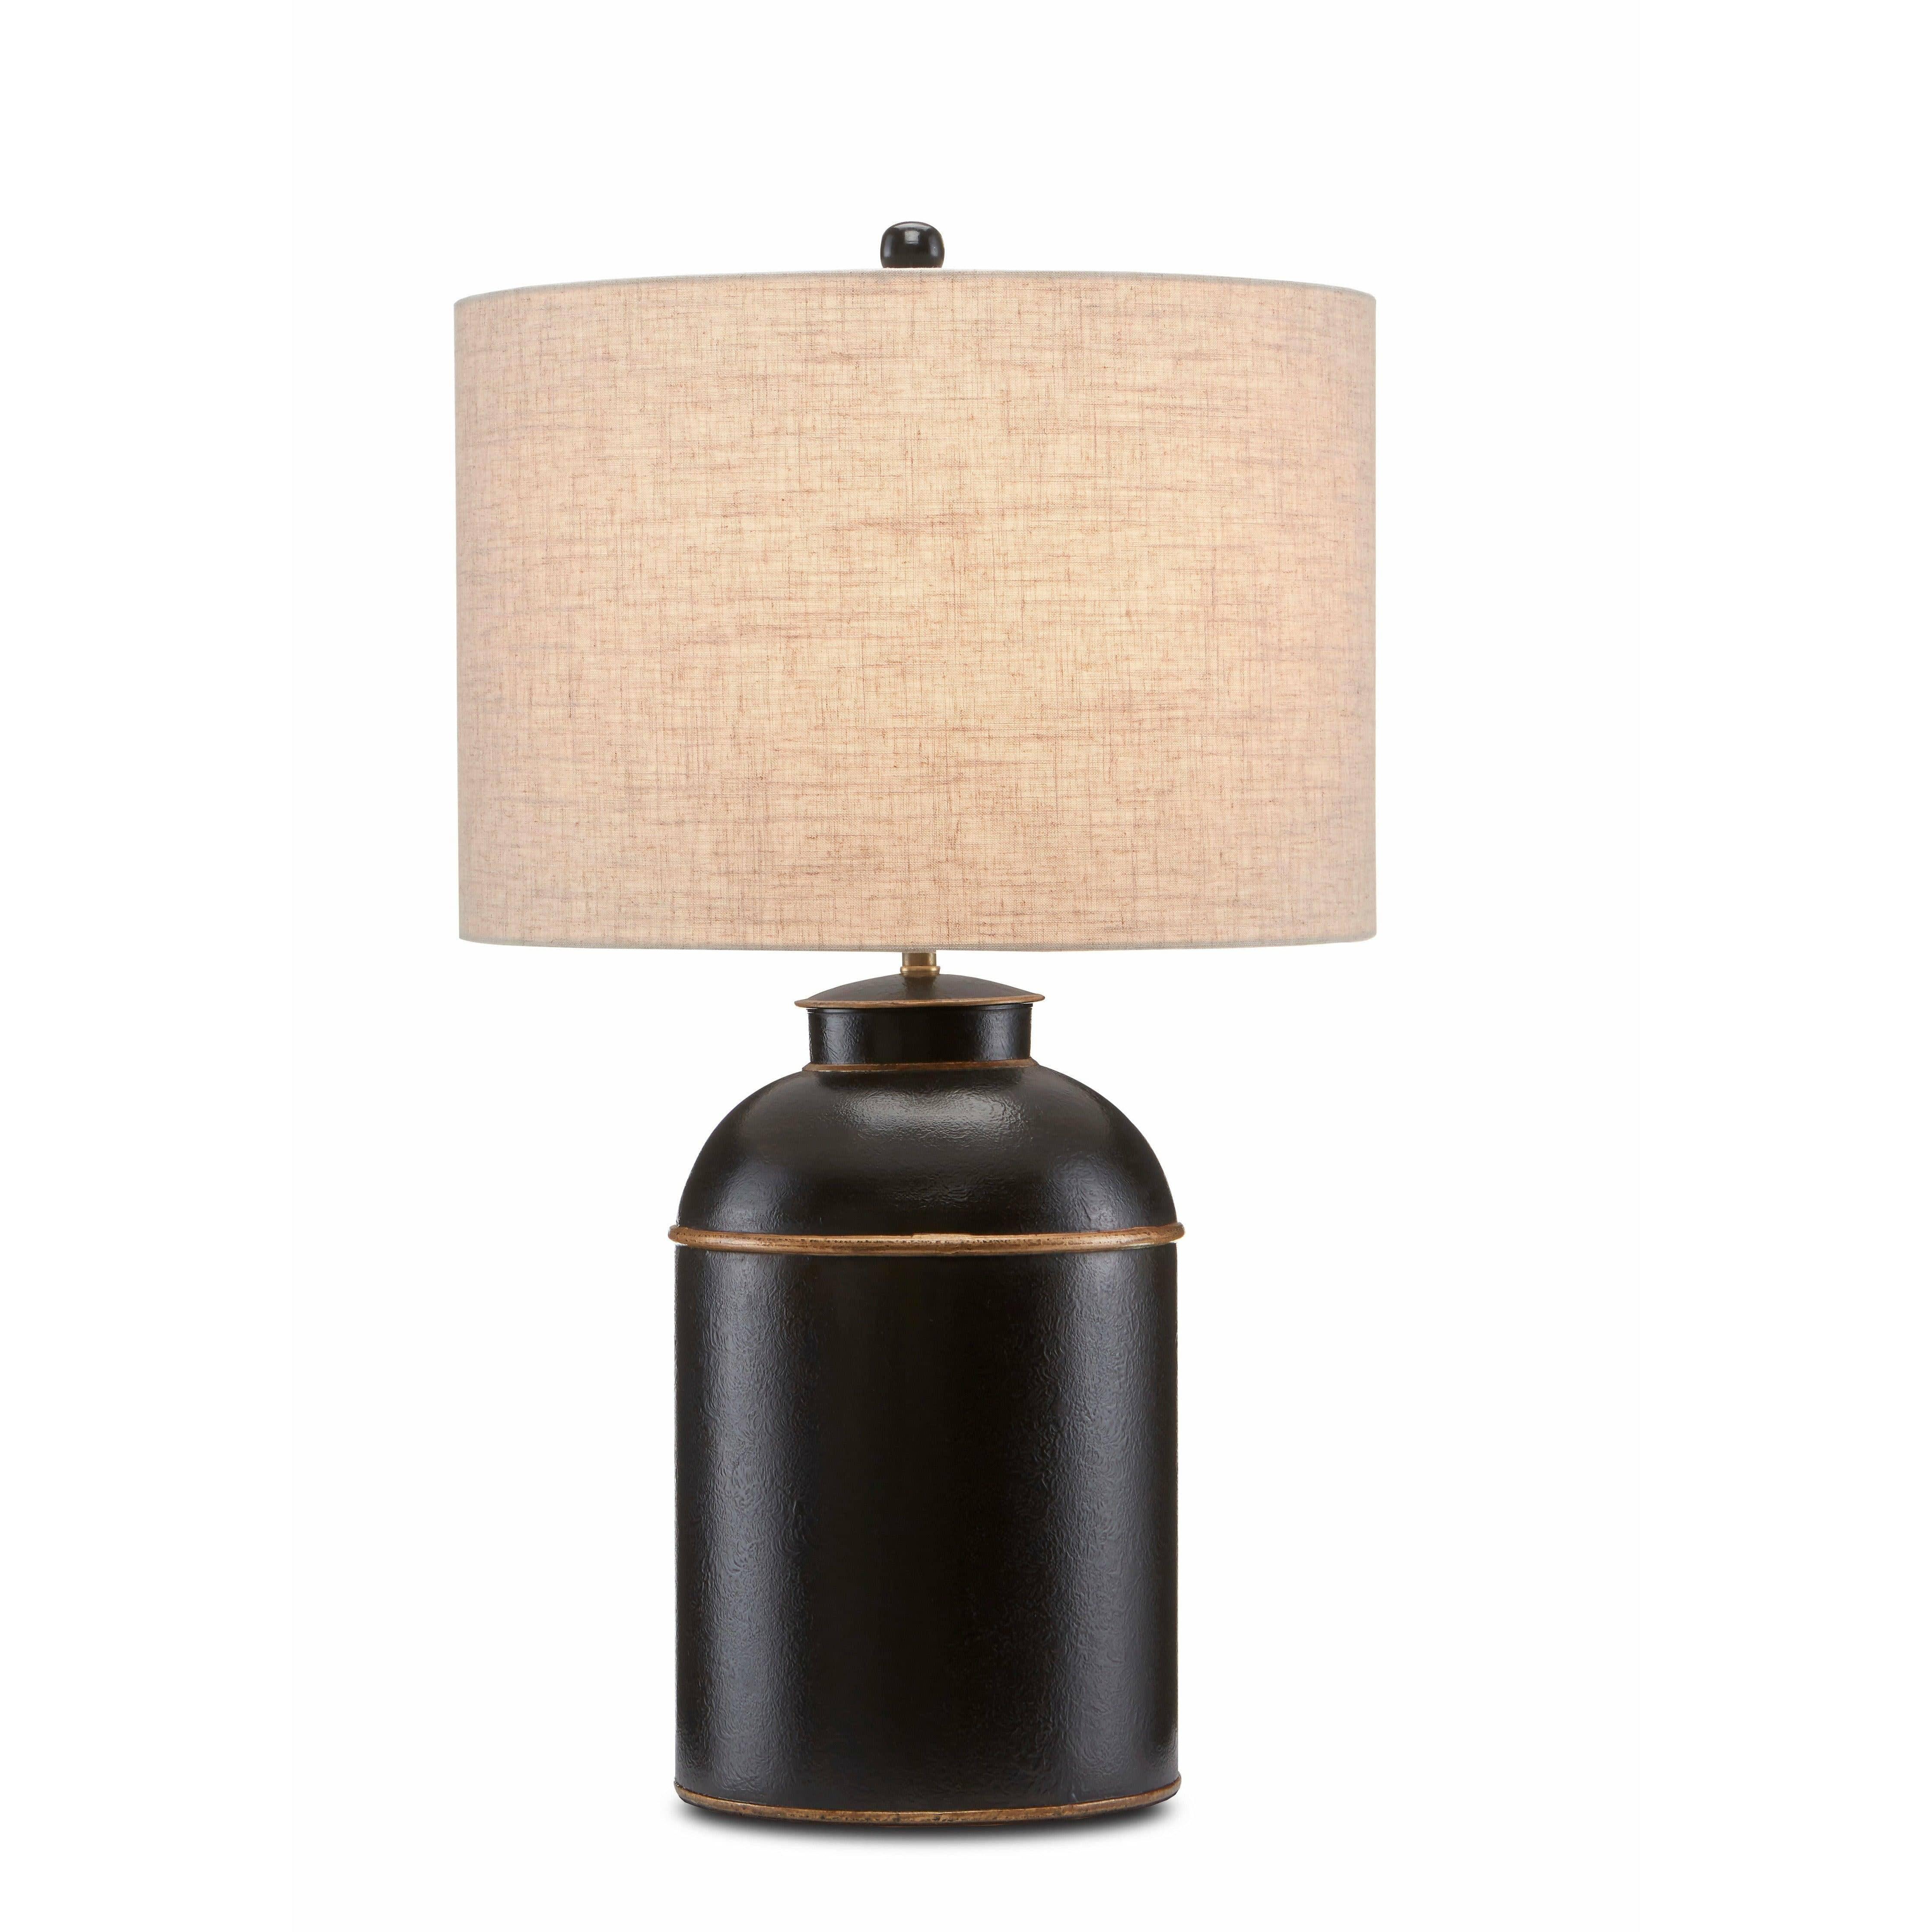 Currey and Company - London Table Lamp - 6000-0703 | Montreal Lighting & Hardware